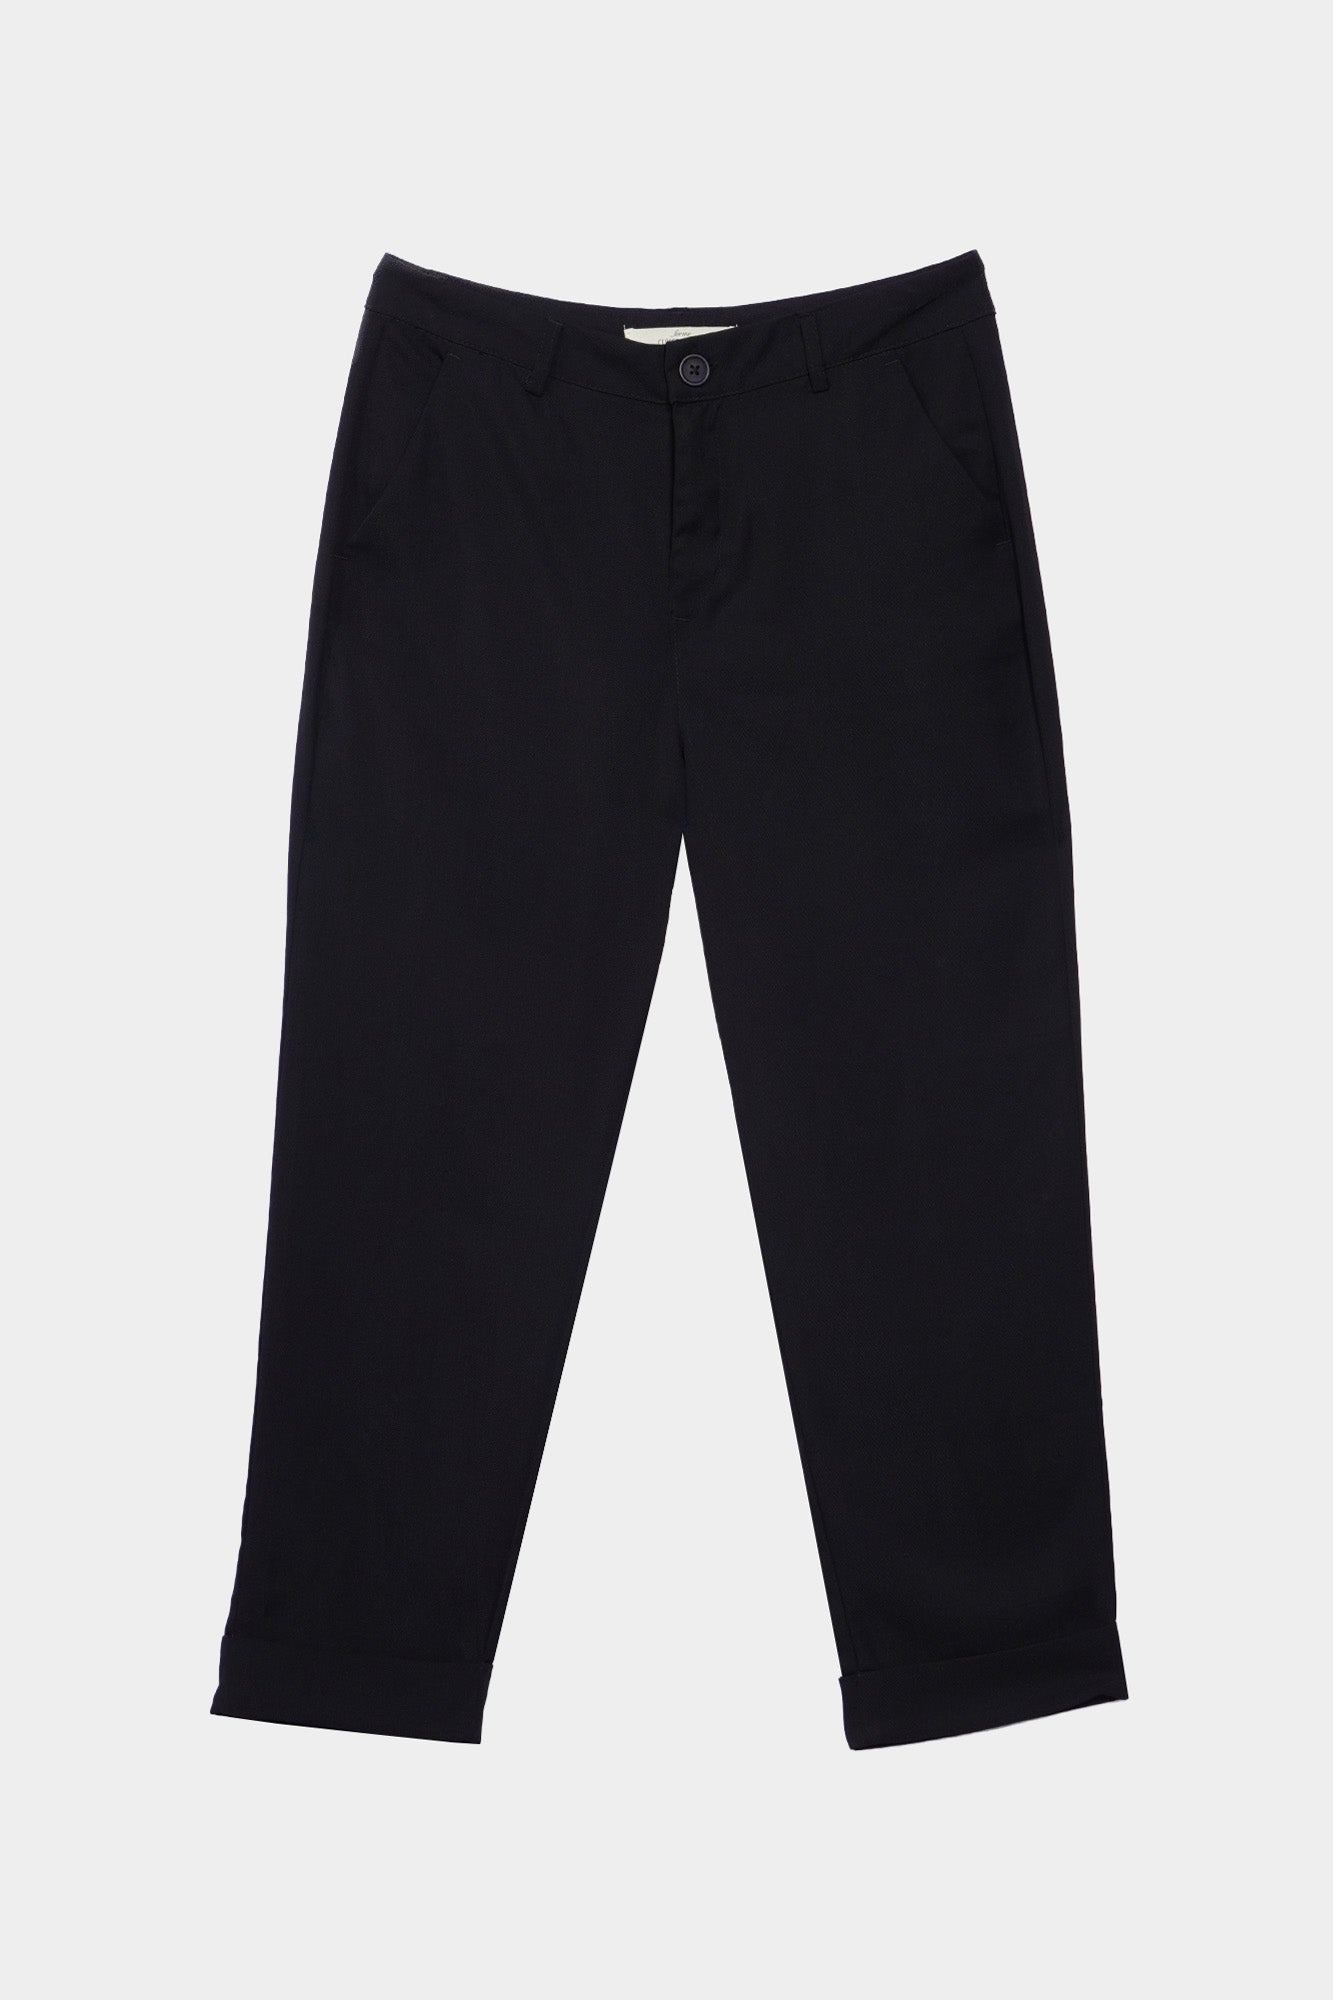 Closet Staples Cuffed Ankle Length Trousers